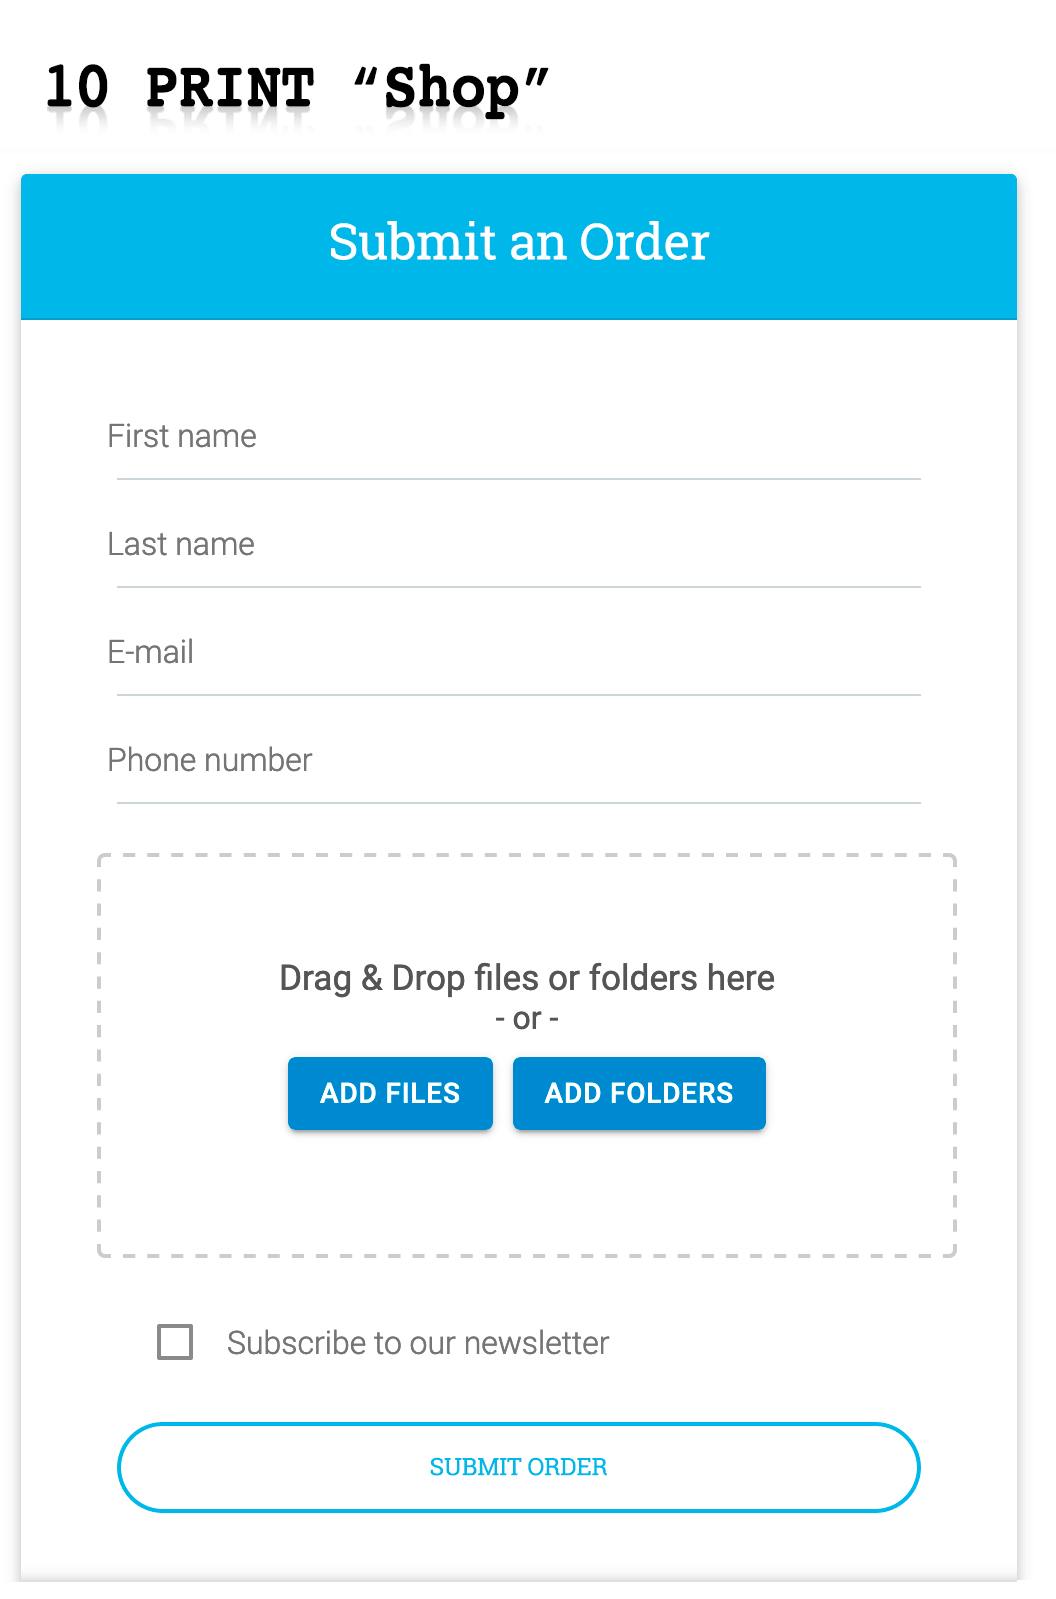 Integrate form on your website to receive files directly.